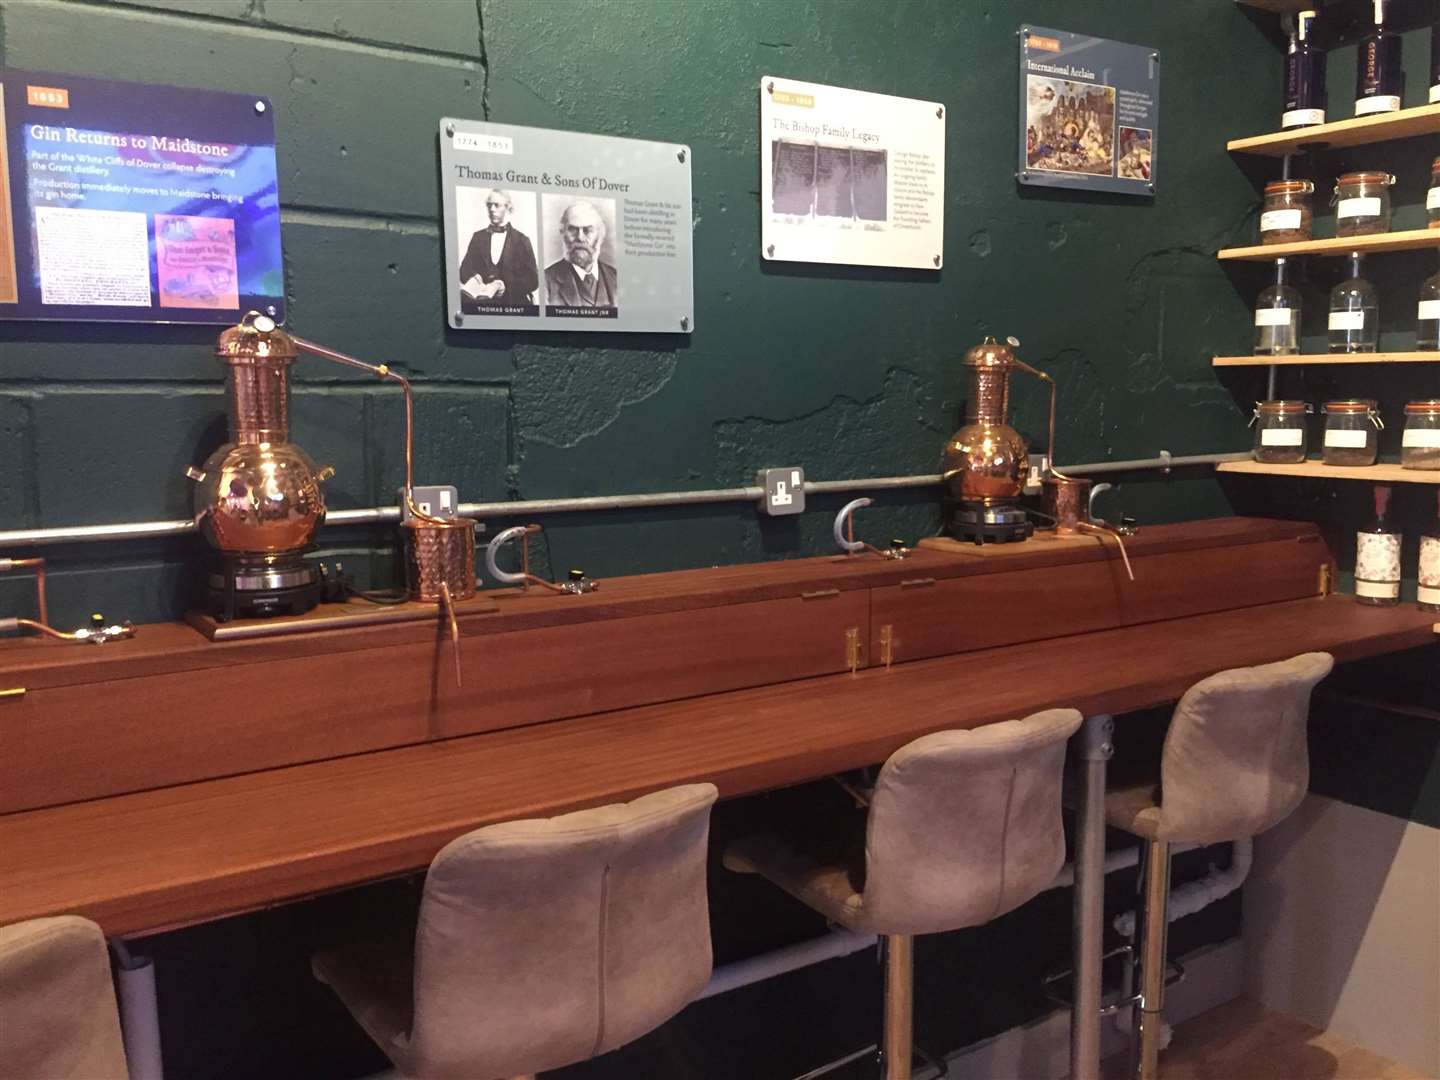 Mini copper stills sit upon the benches in the experience room